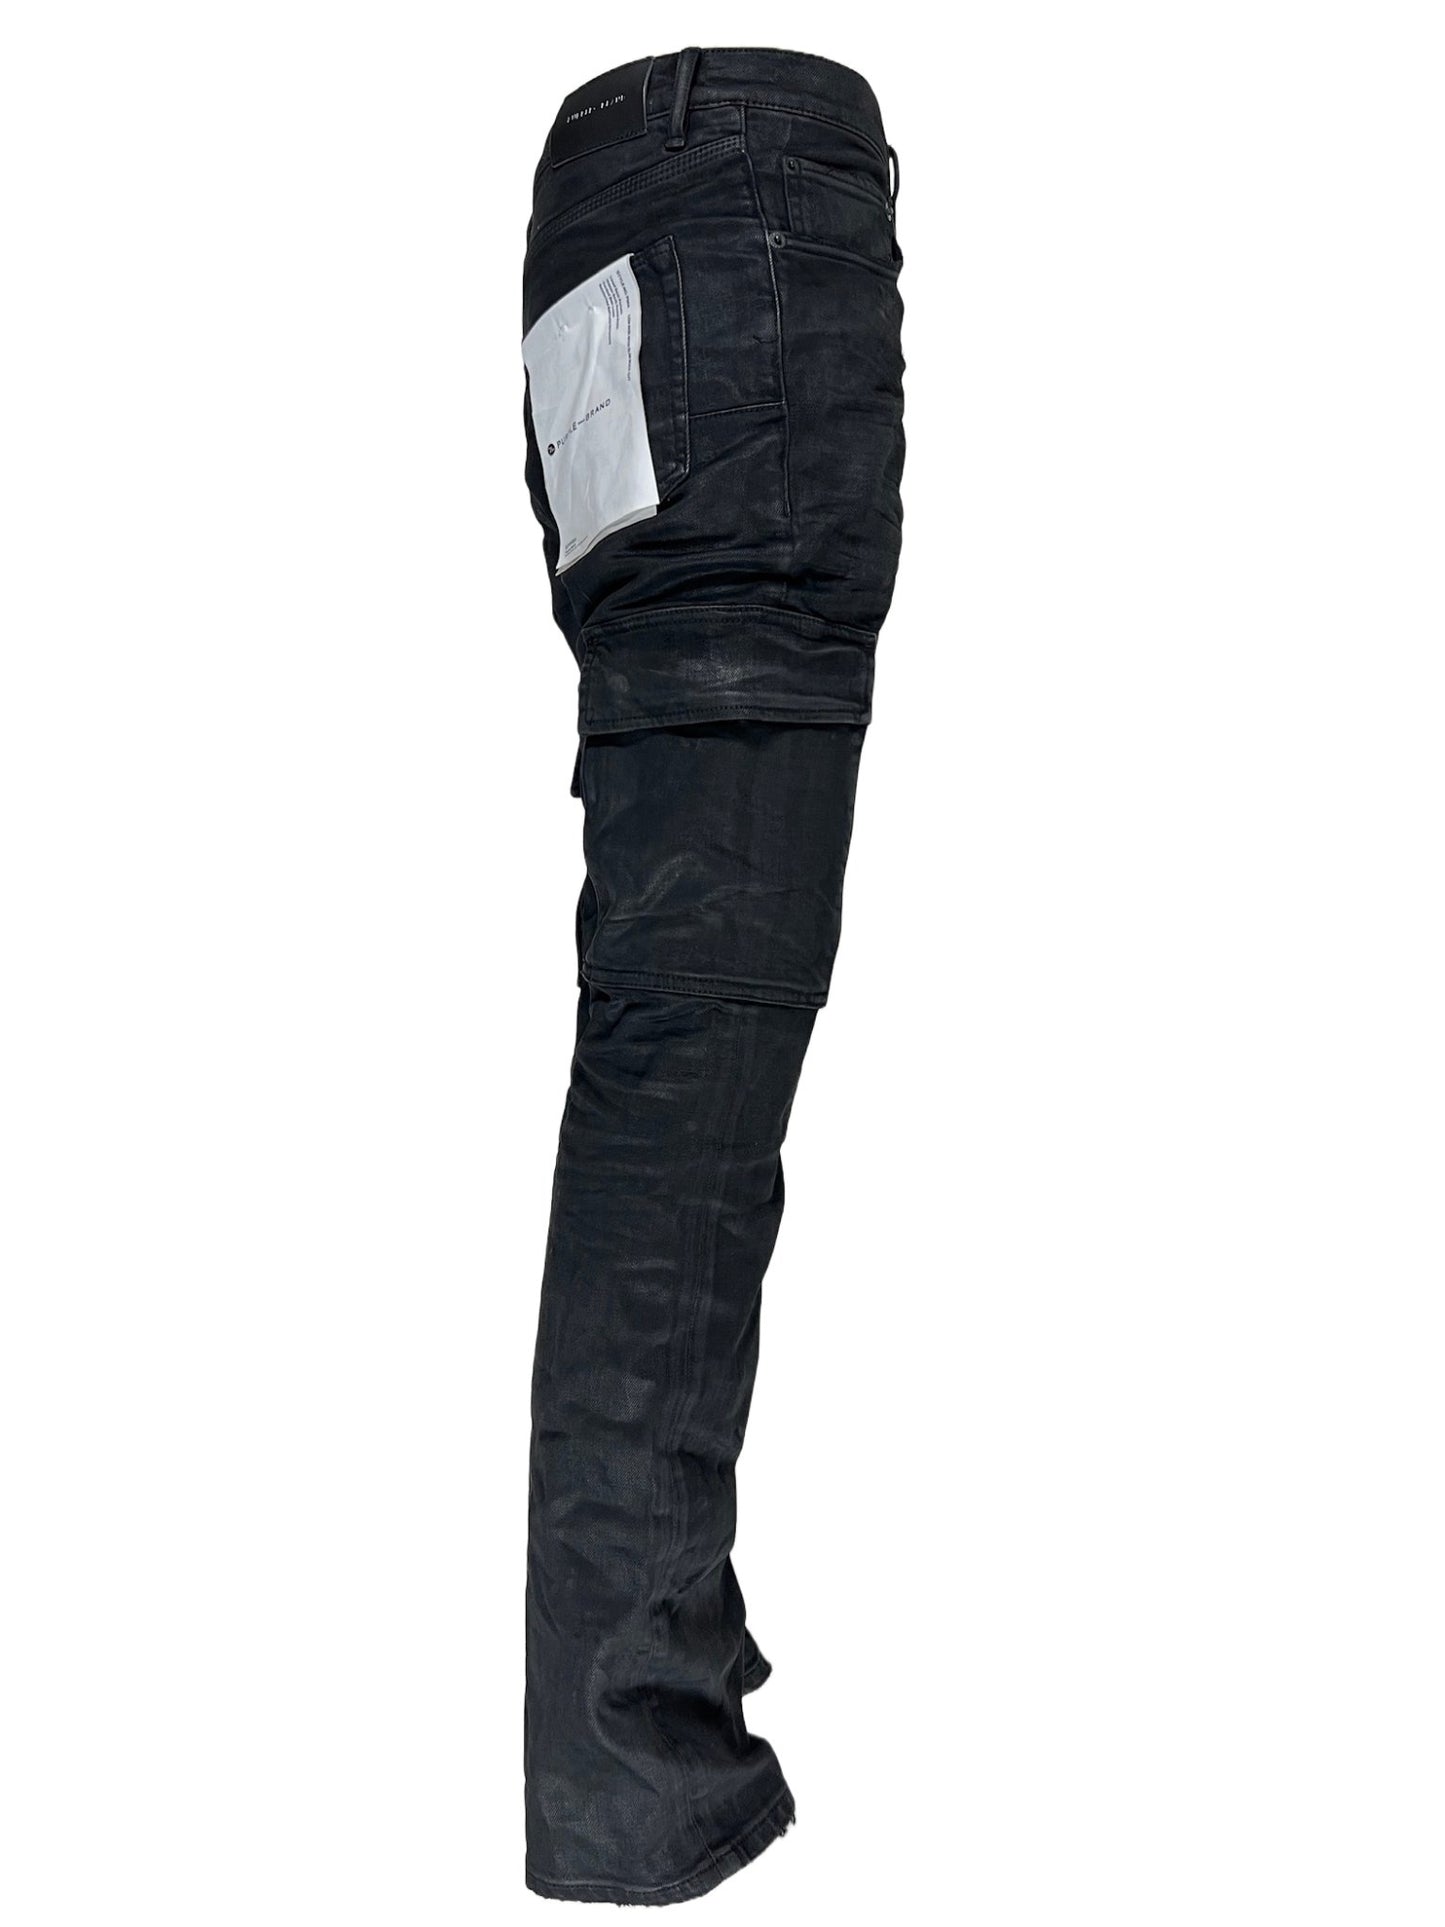 The back view of a pair of PURPLE BRAND JEANS P004-BLRC BLACK RESIN CARGO FLARE BLACK with a waxed finish.